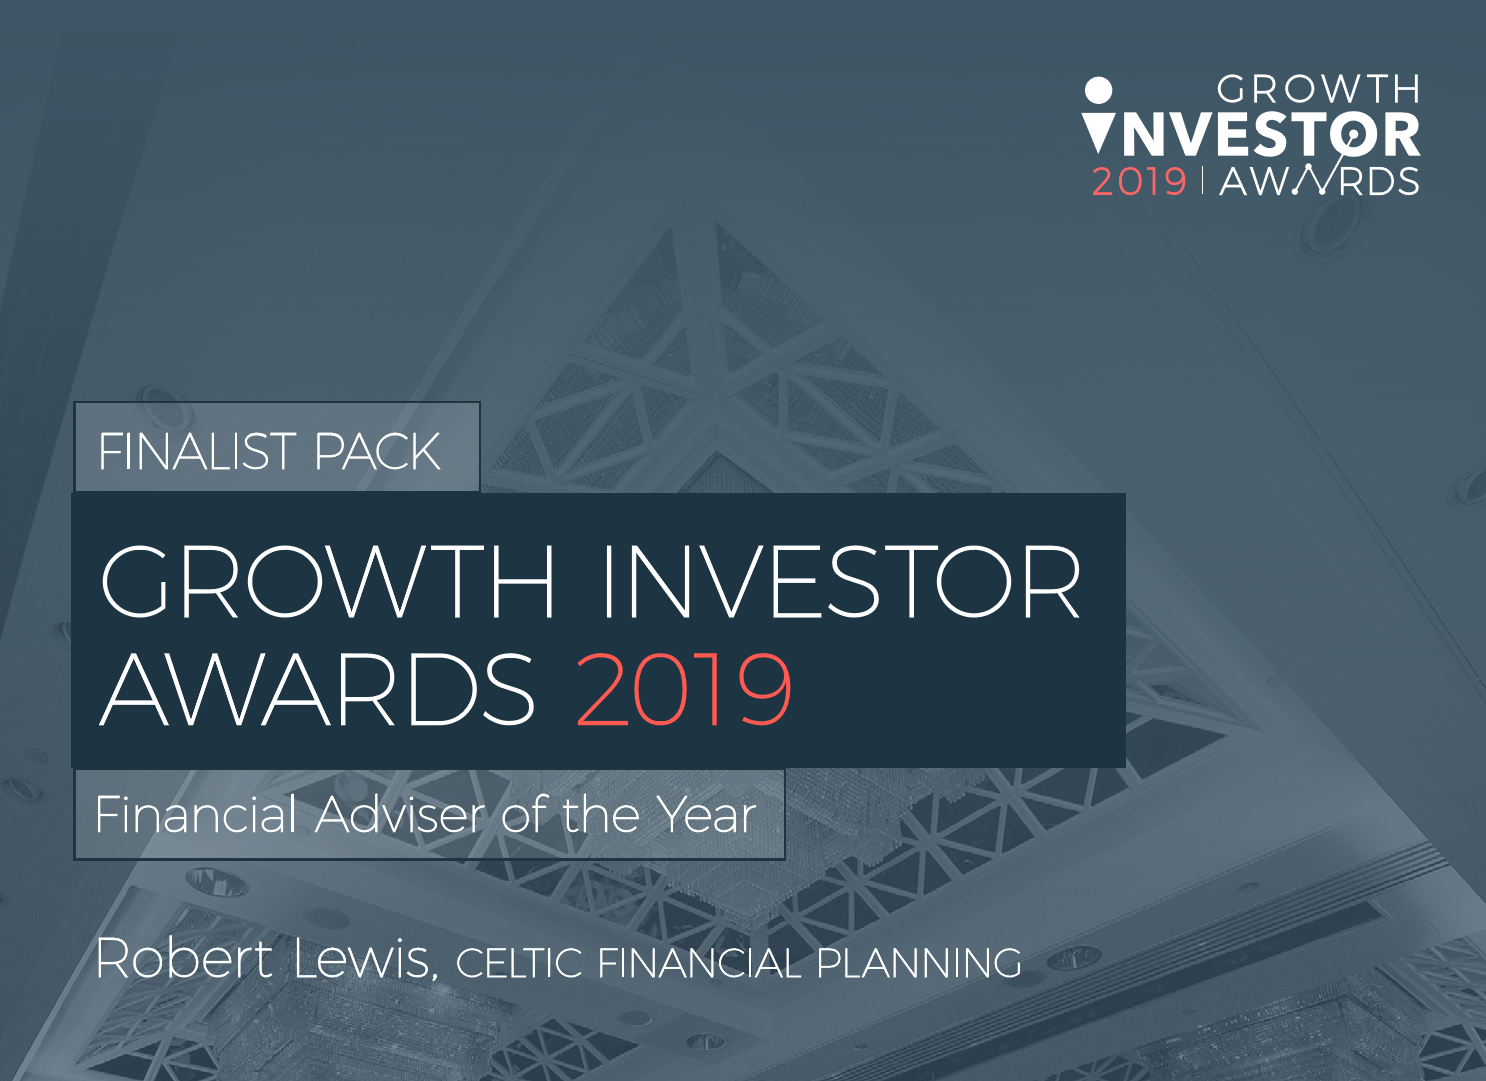 Robert Lewis Financial Adviser of the Year 2019